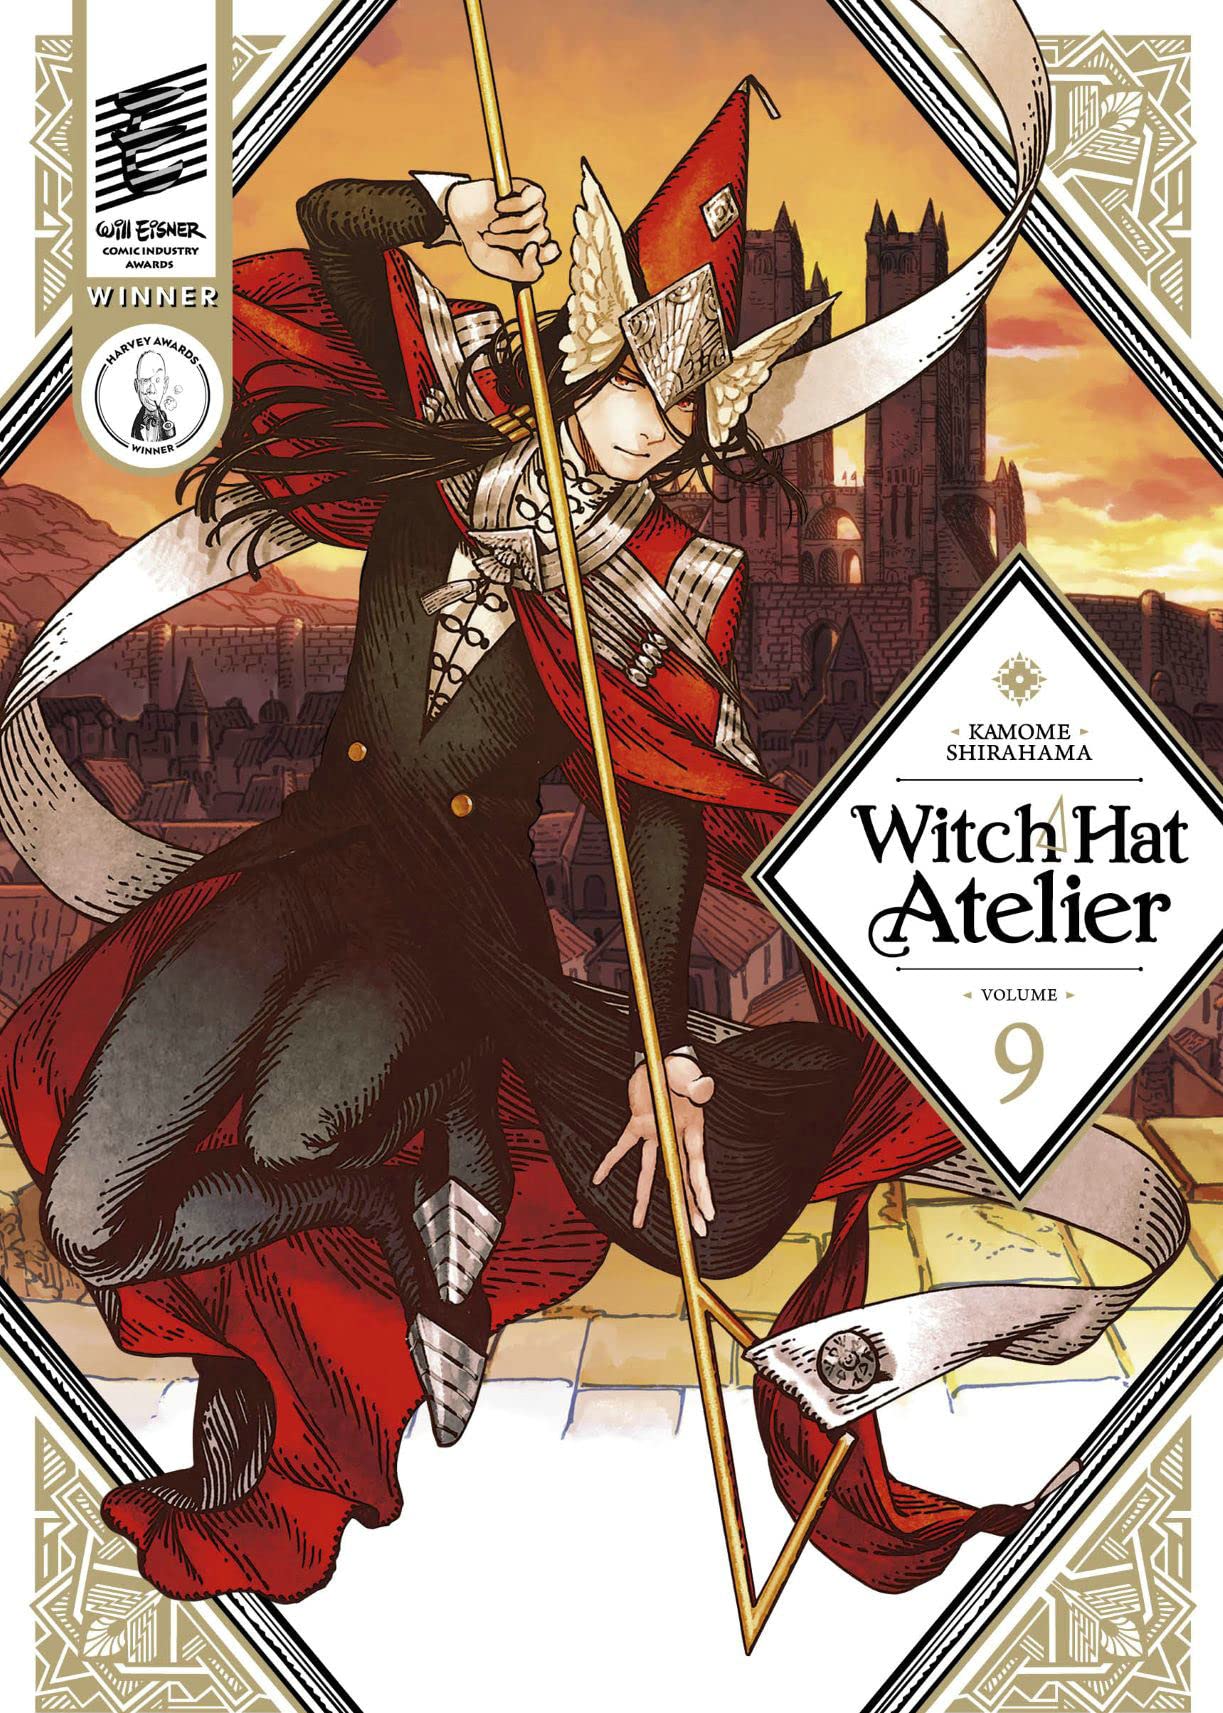 WITCH HAT ATELIER #9